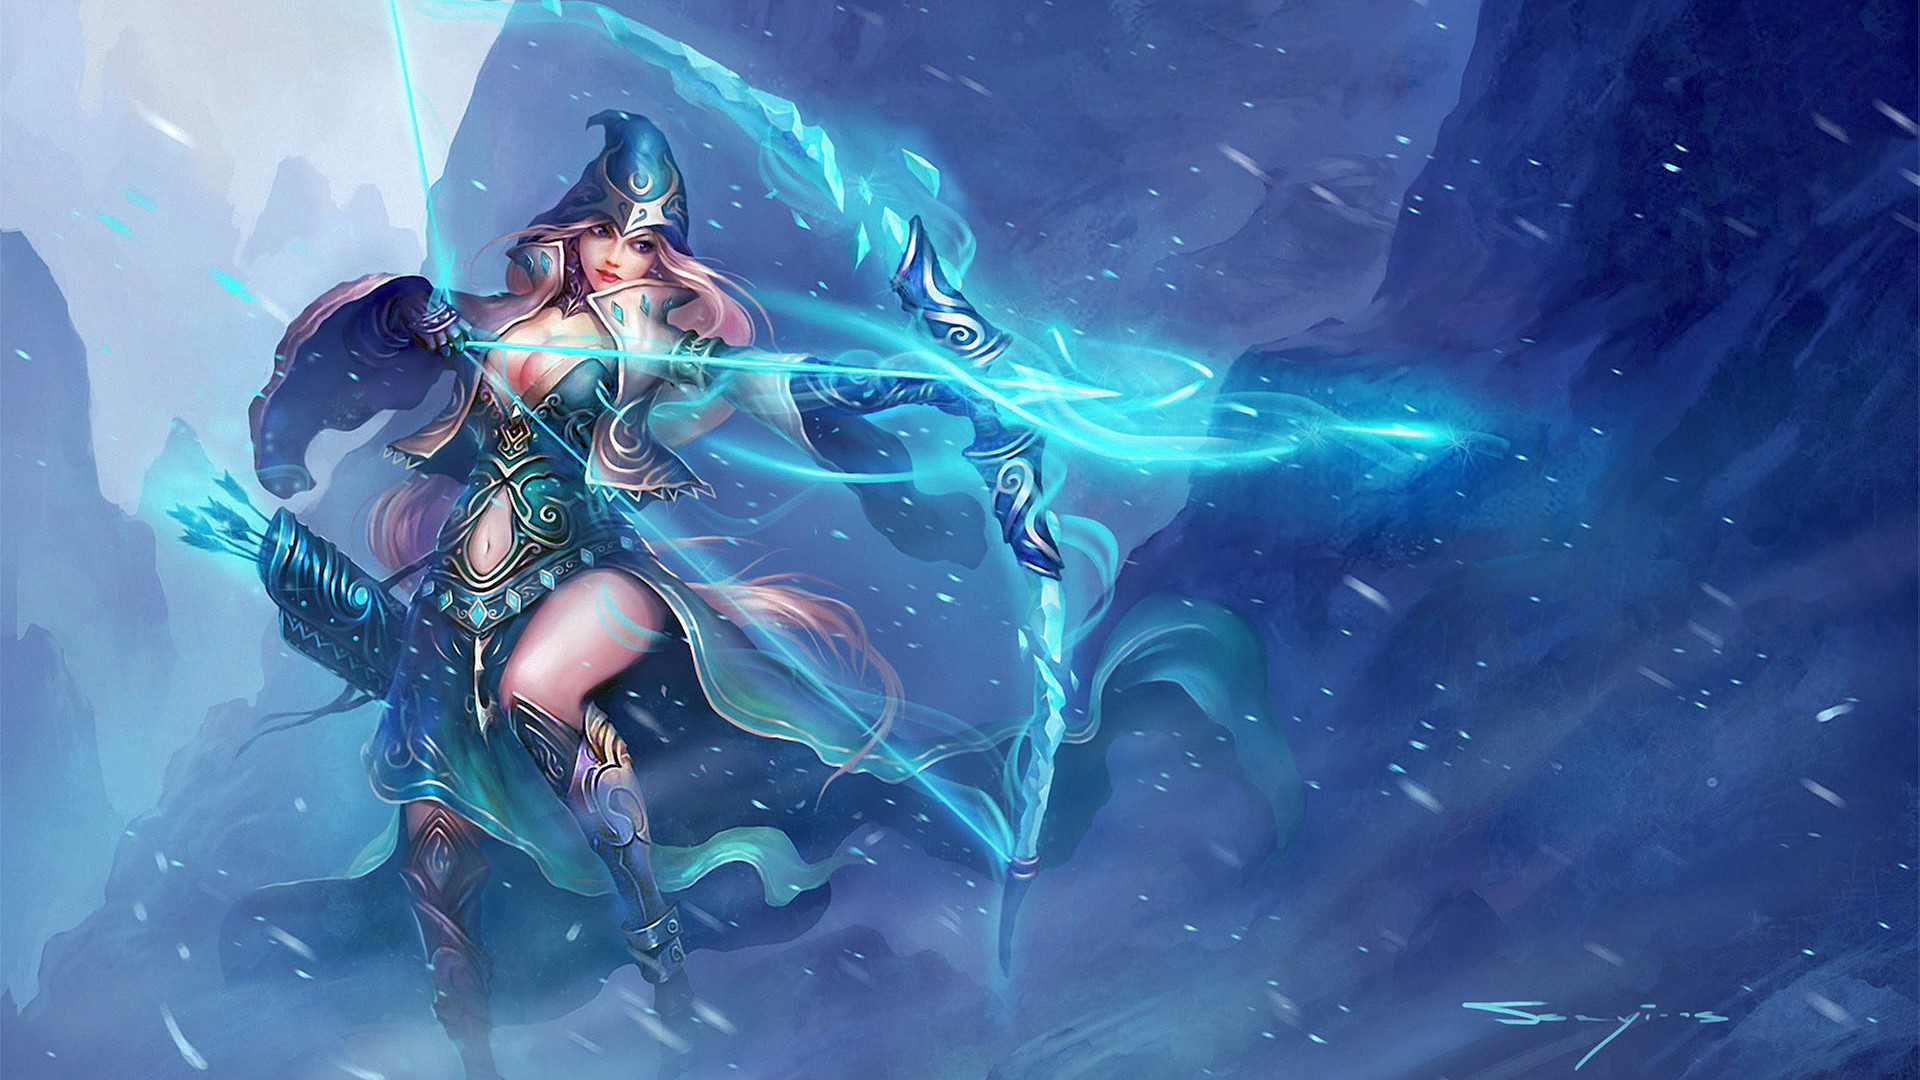 ashe wallpaper hd,cg artwork,illustration,graphic design,fictional character,space